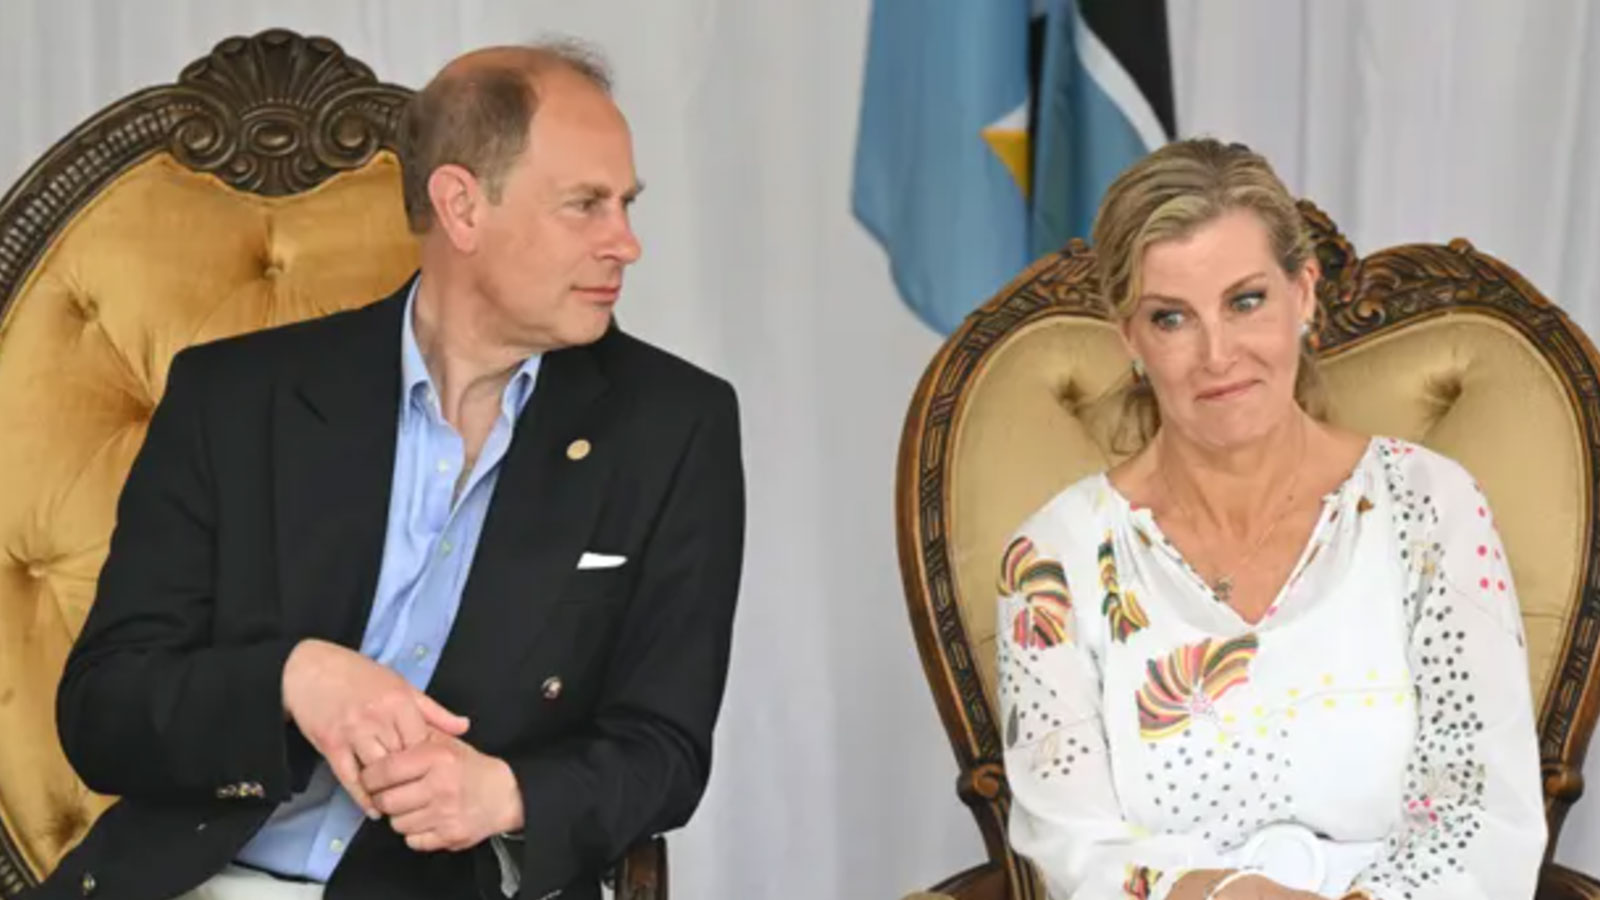 Prince Edward and Sophie, Countess of Wessex during the Caribbean tour.